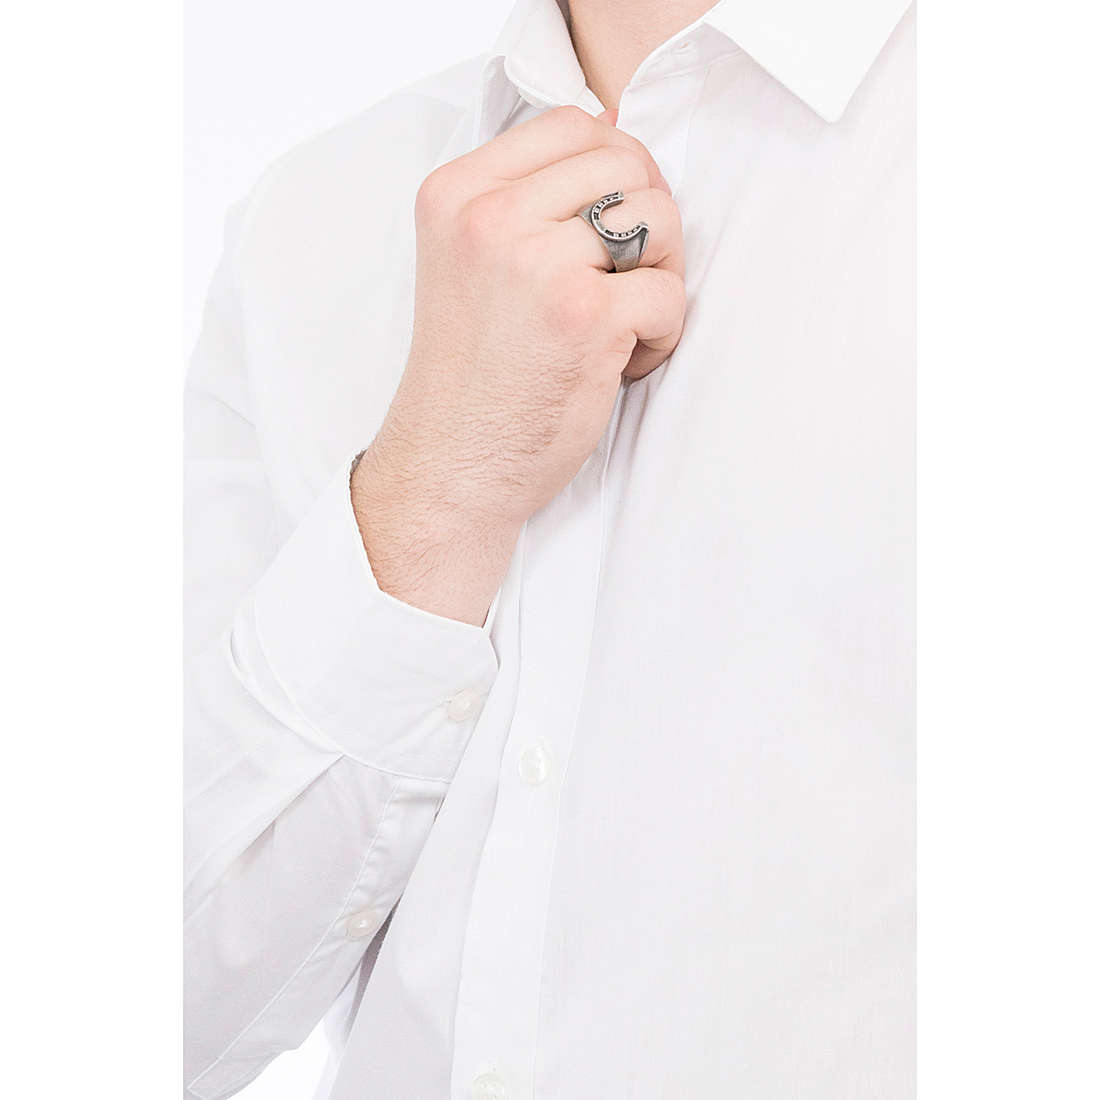 Fossil rings man JF03182797515 wearing